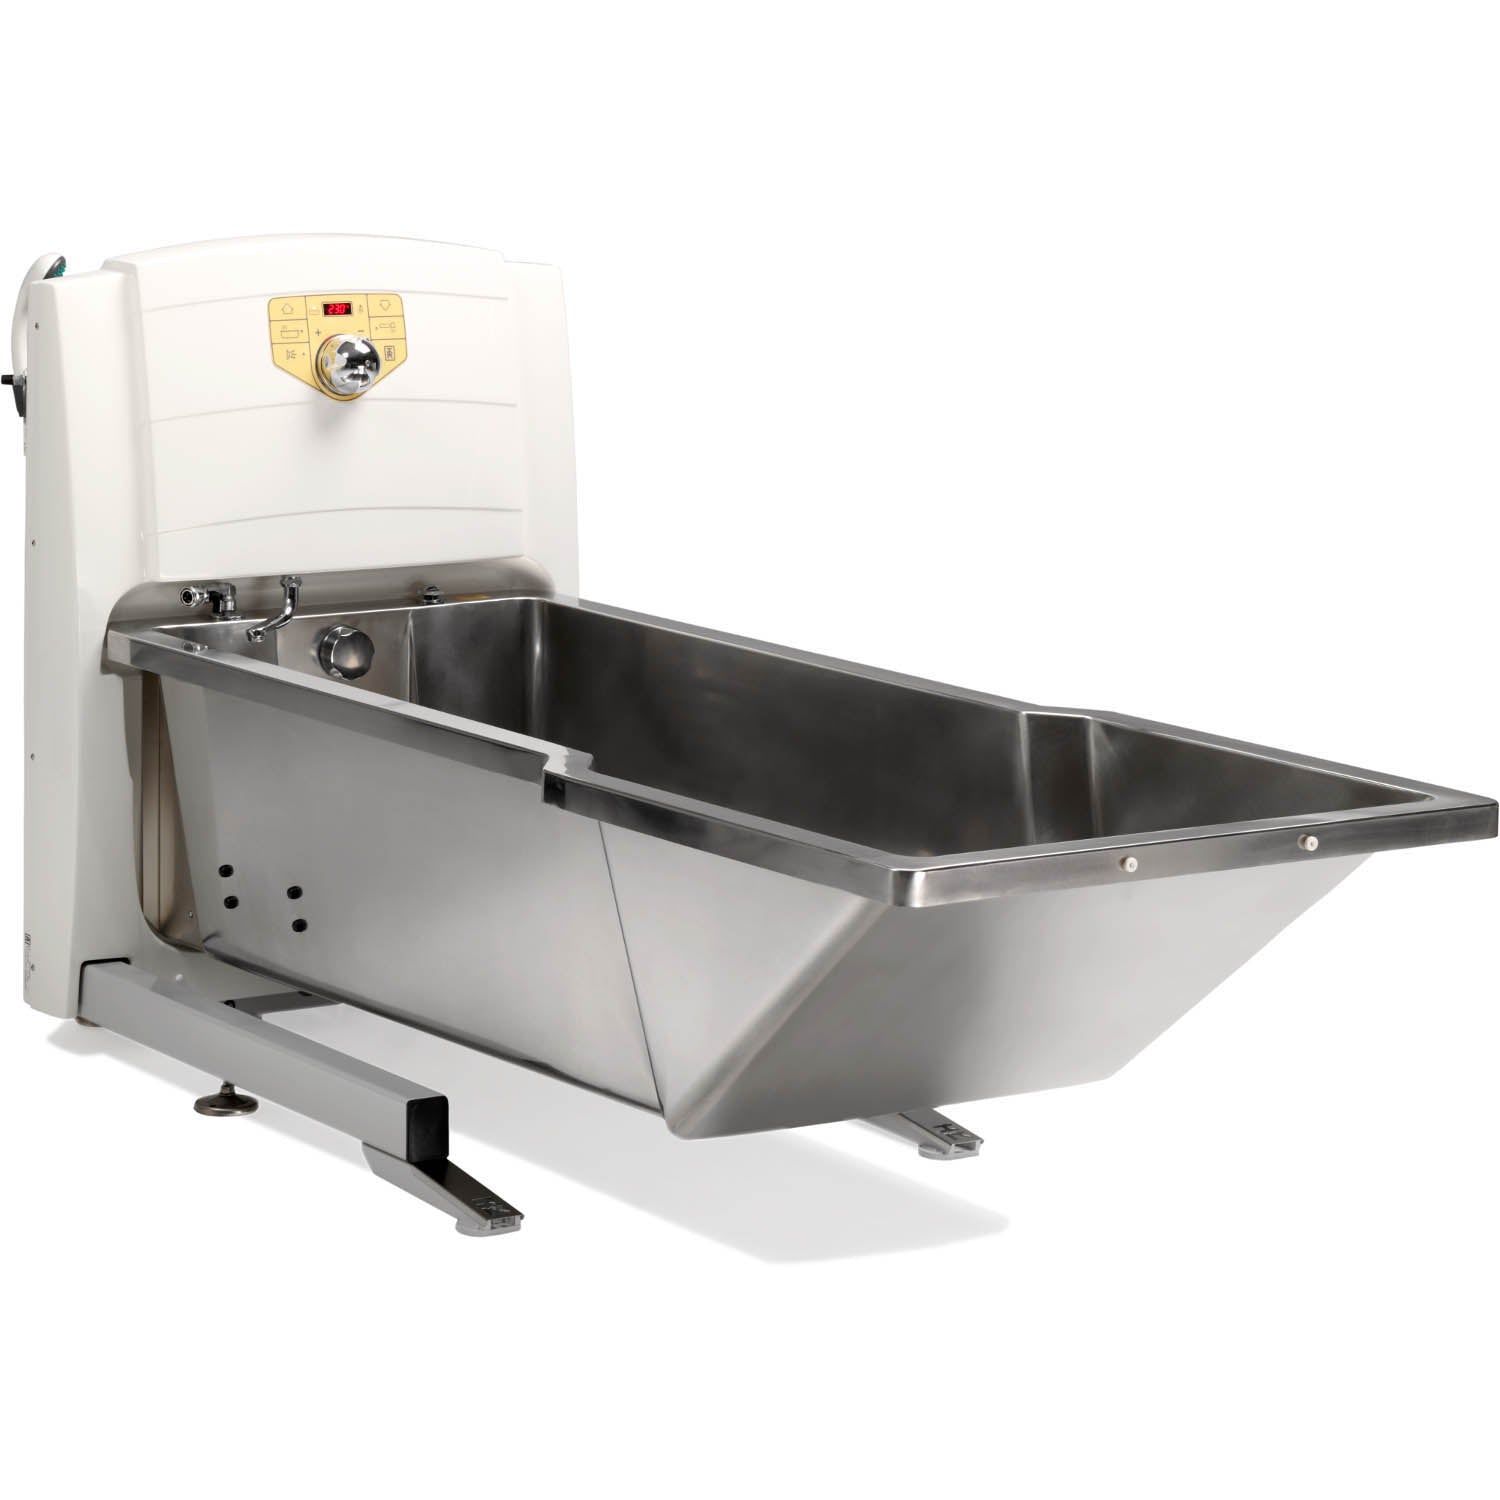 TR Equipment TR 900-CWASS Electric Height Adjustable Bathtub- Stainless Steel Tub